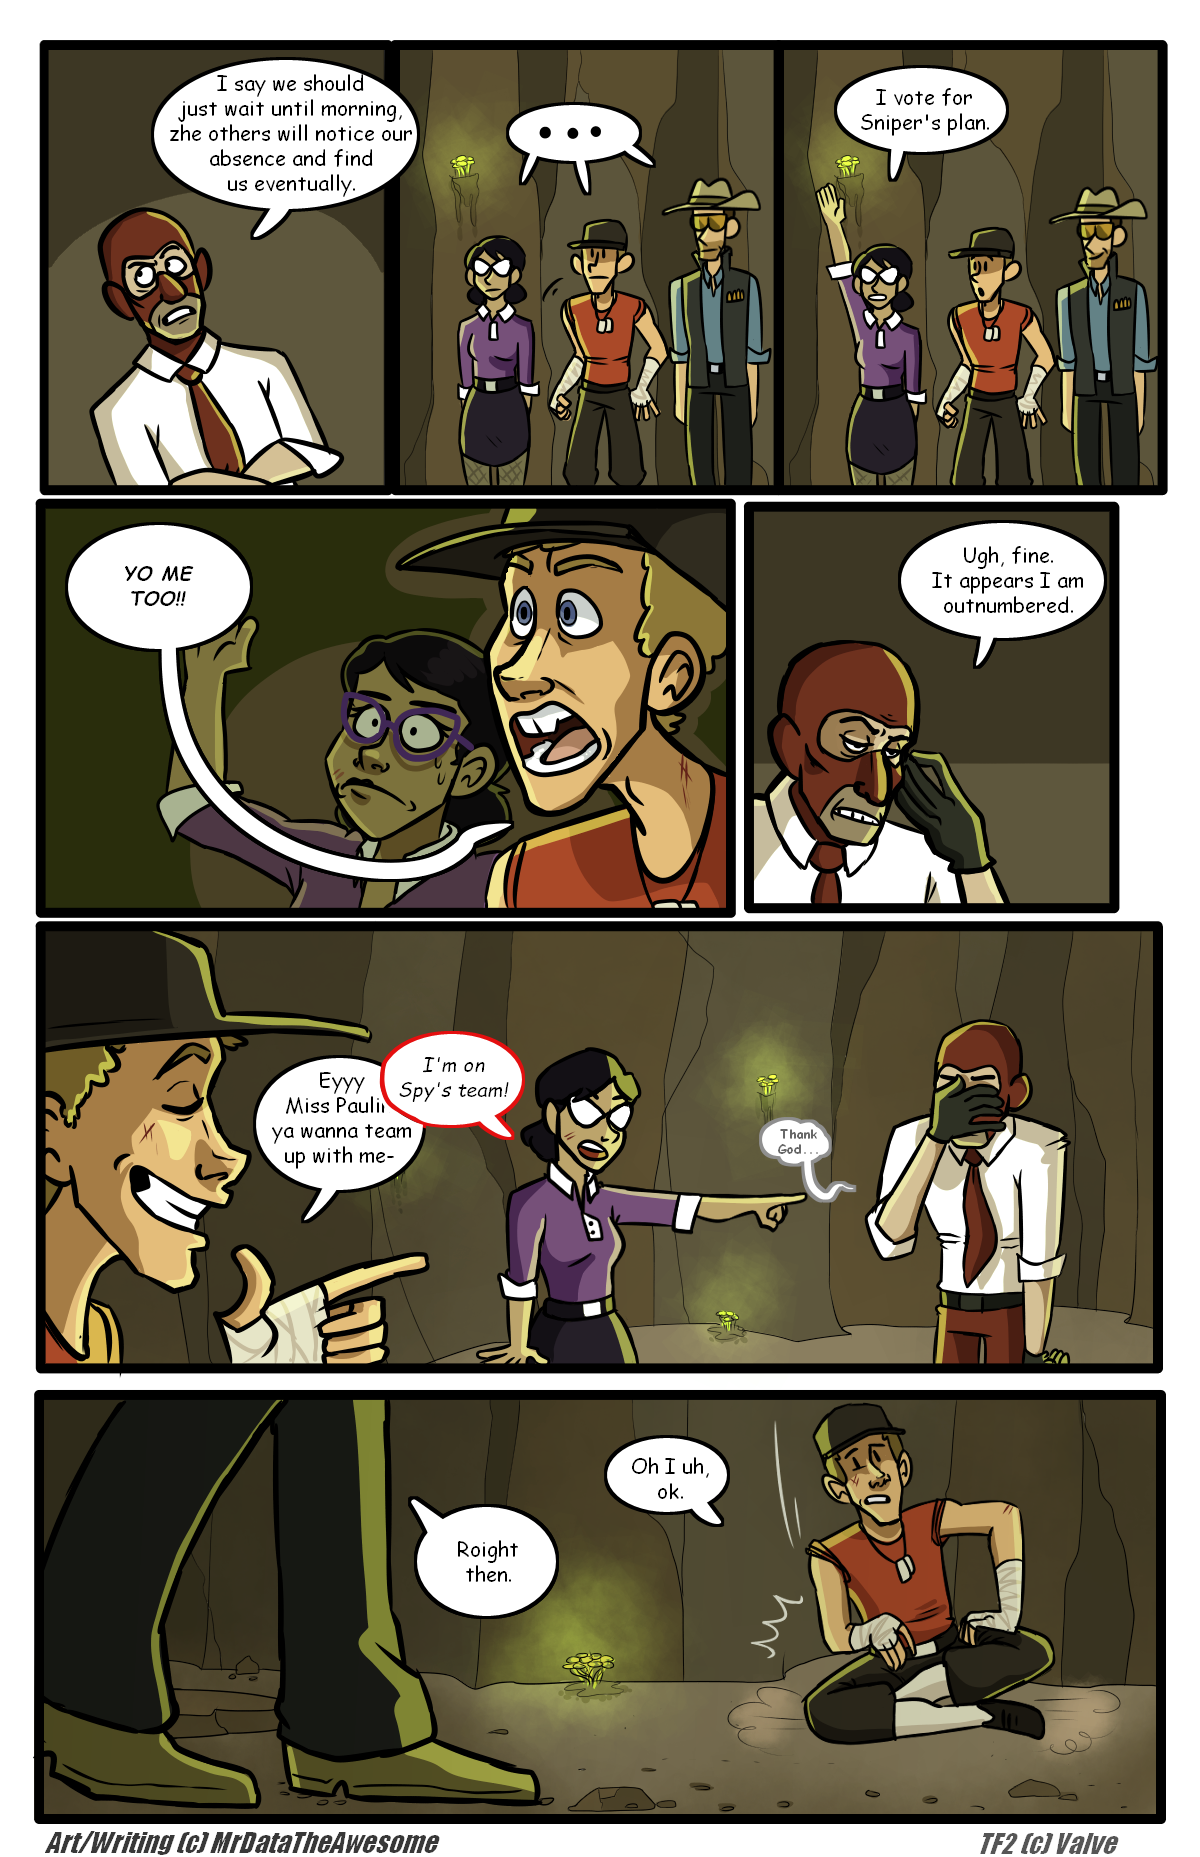 Papers, Please (TF2 version) by Grido555 on DeviantArt